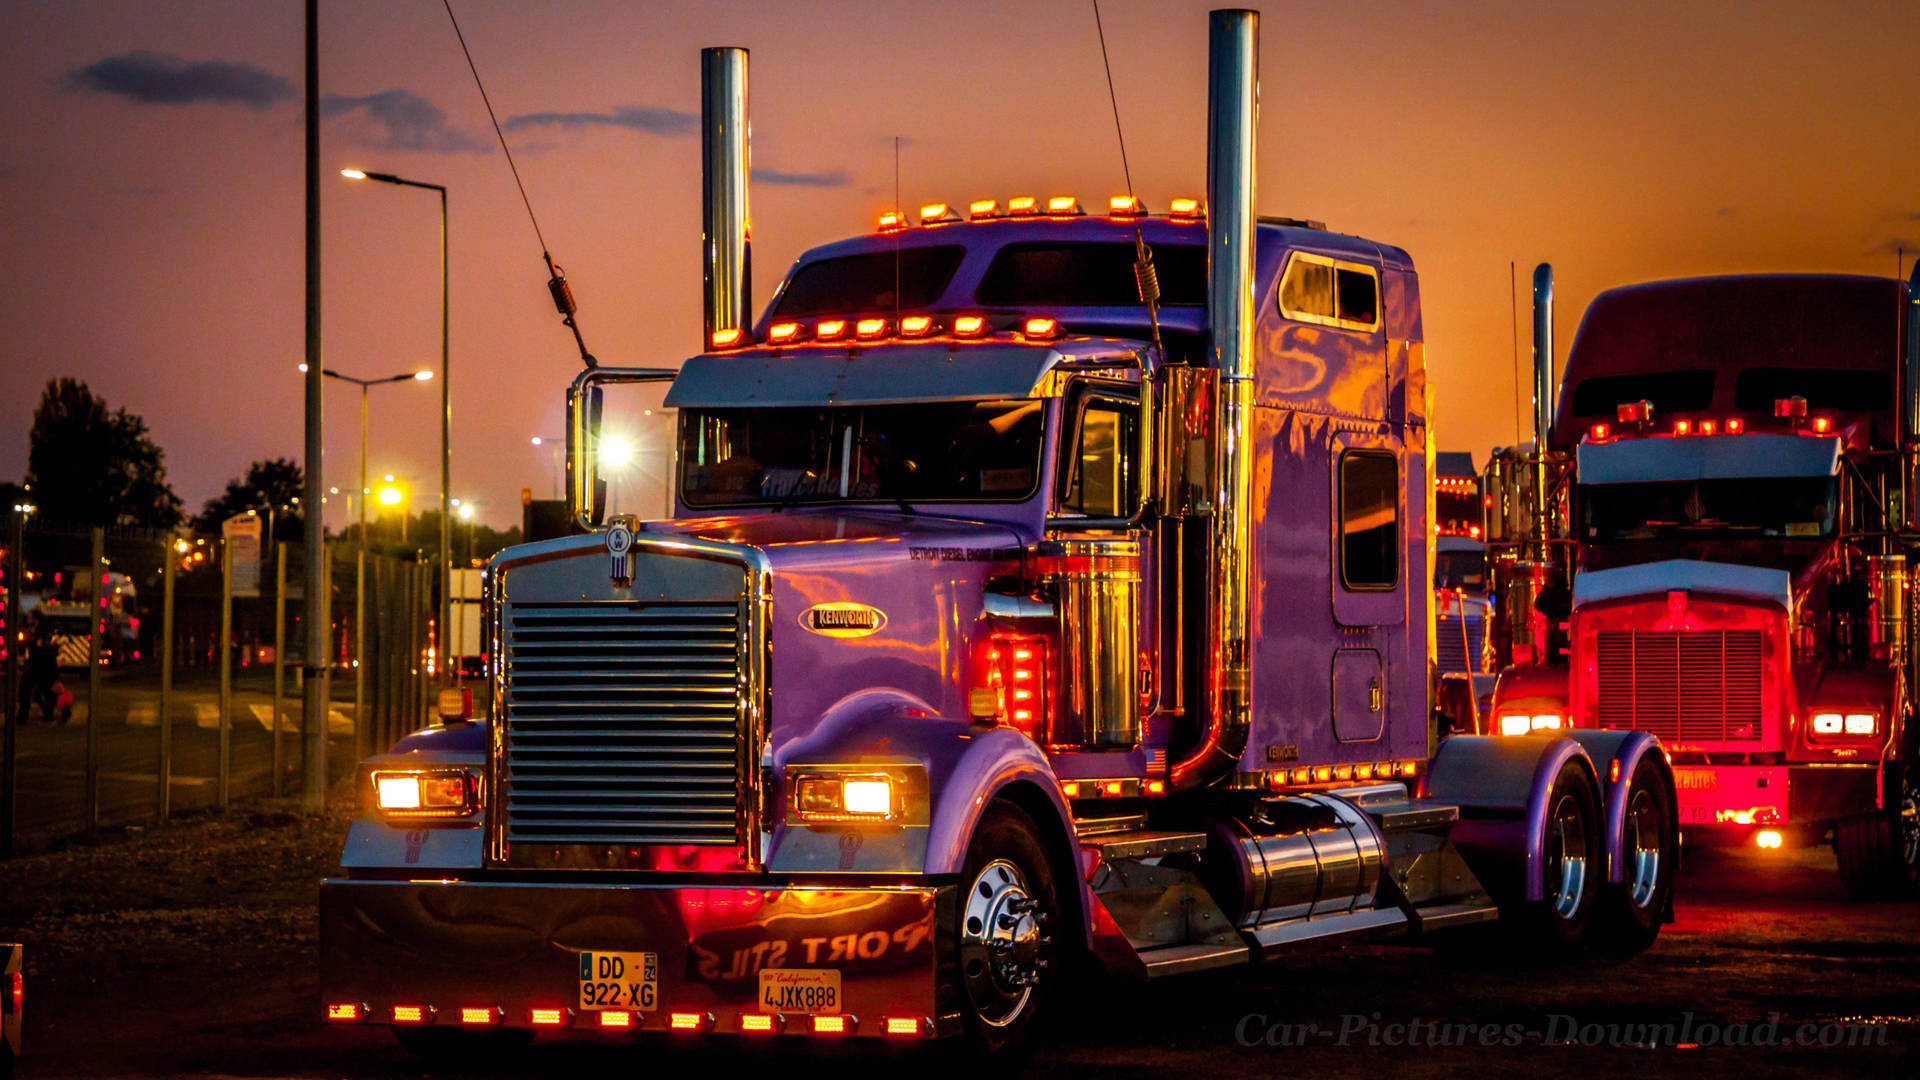 Colorful Cool Truck At Night Wallpaper